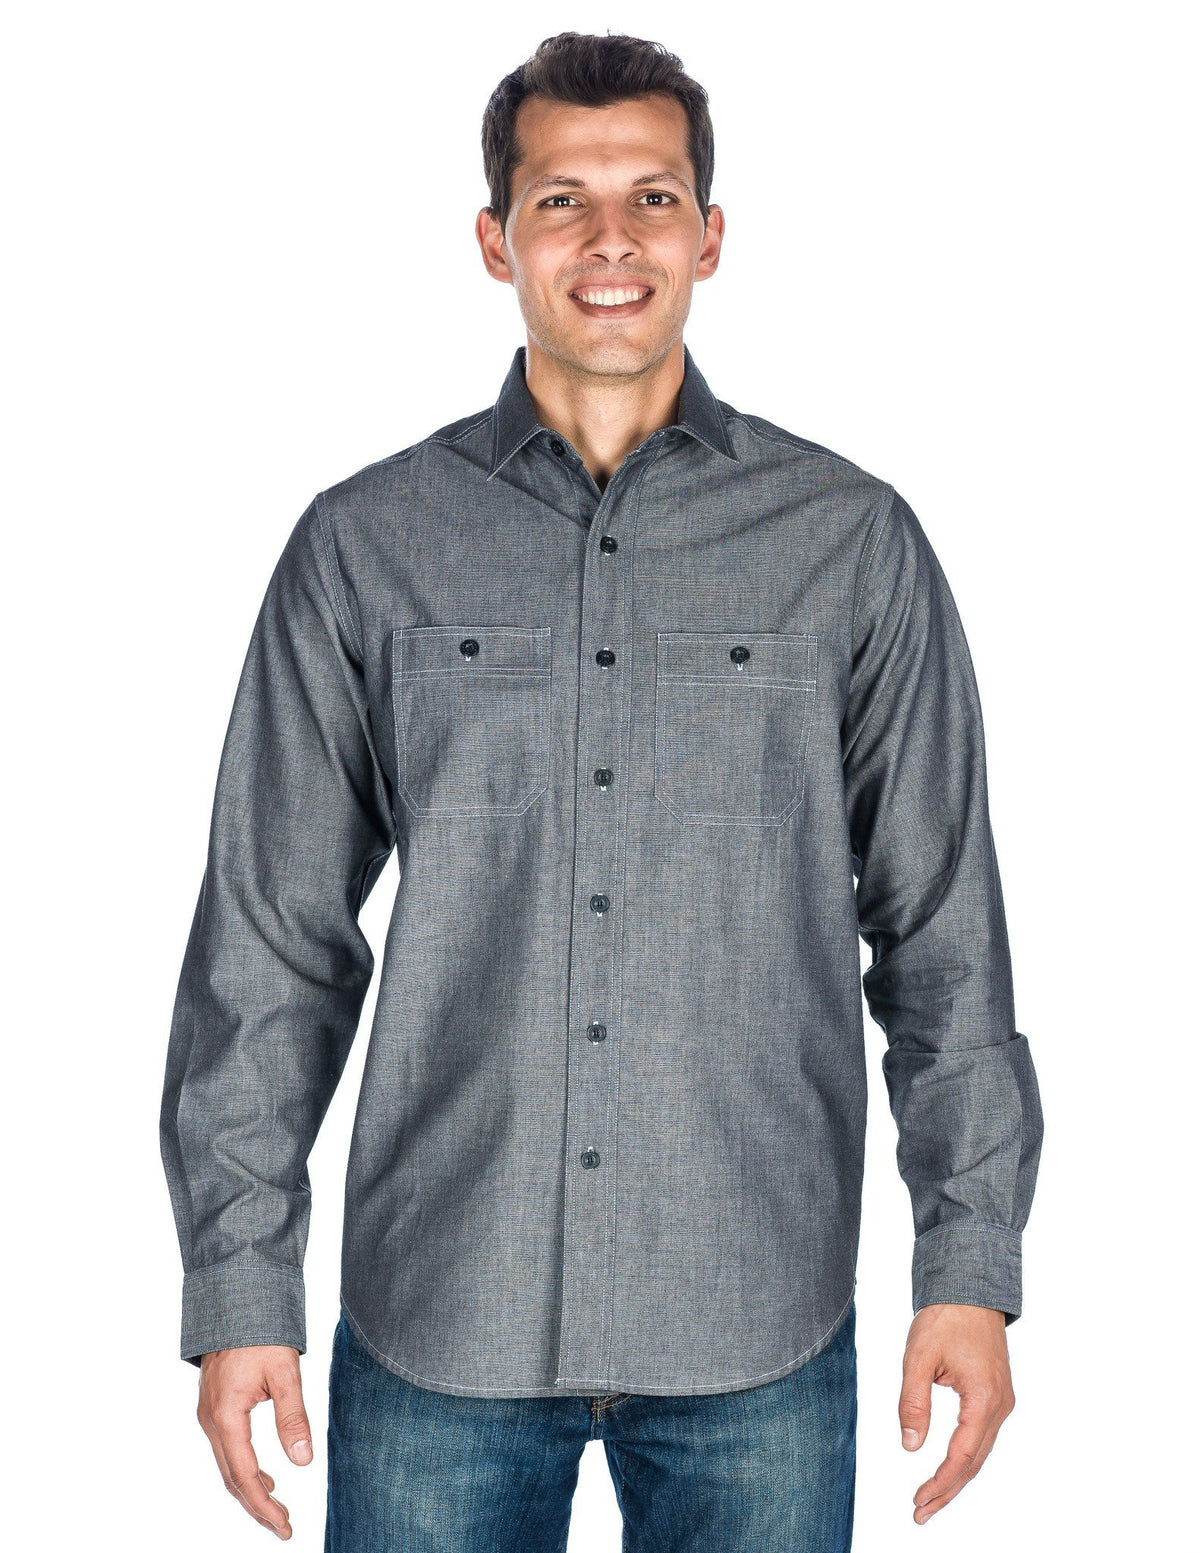 Men's Comfort-Fit Cotton Chambray Casual Shirt - Black